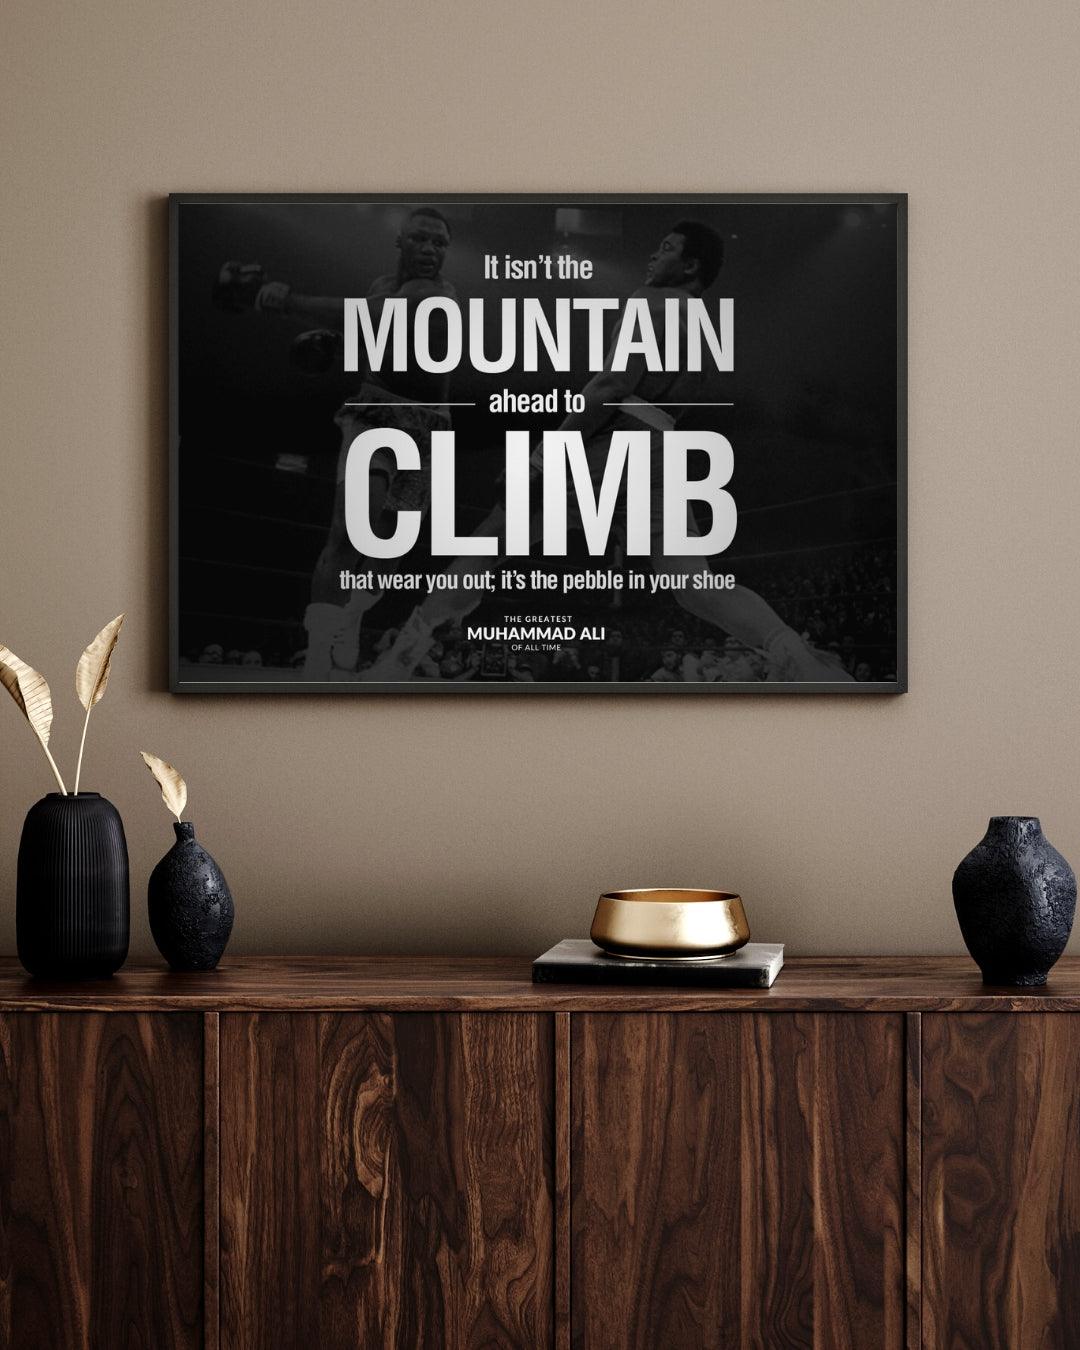 Motivational Poster featuring Muhammad Ali and his Quote | Get yours Now at Hustler's Inventory